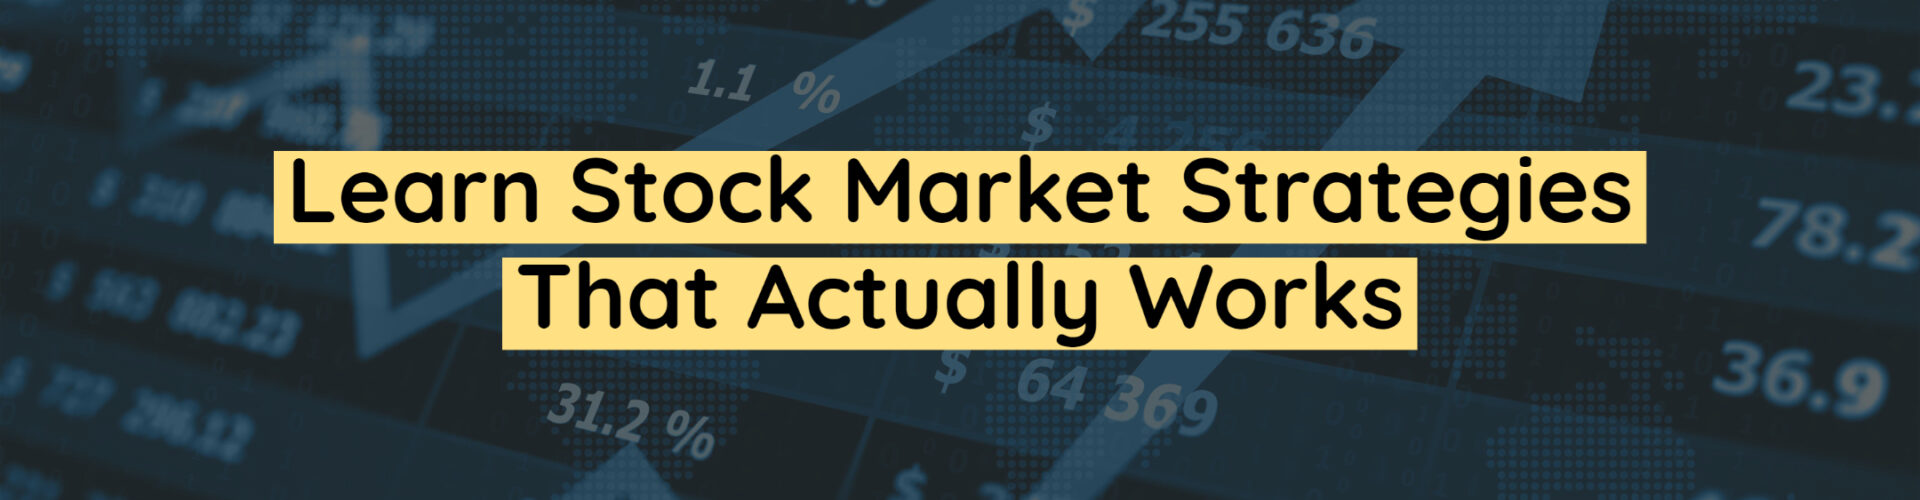 Learn Stock Market strategies that actually works